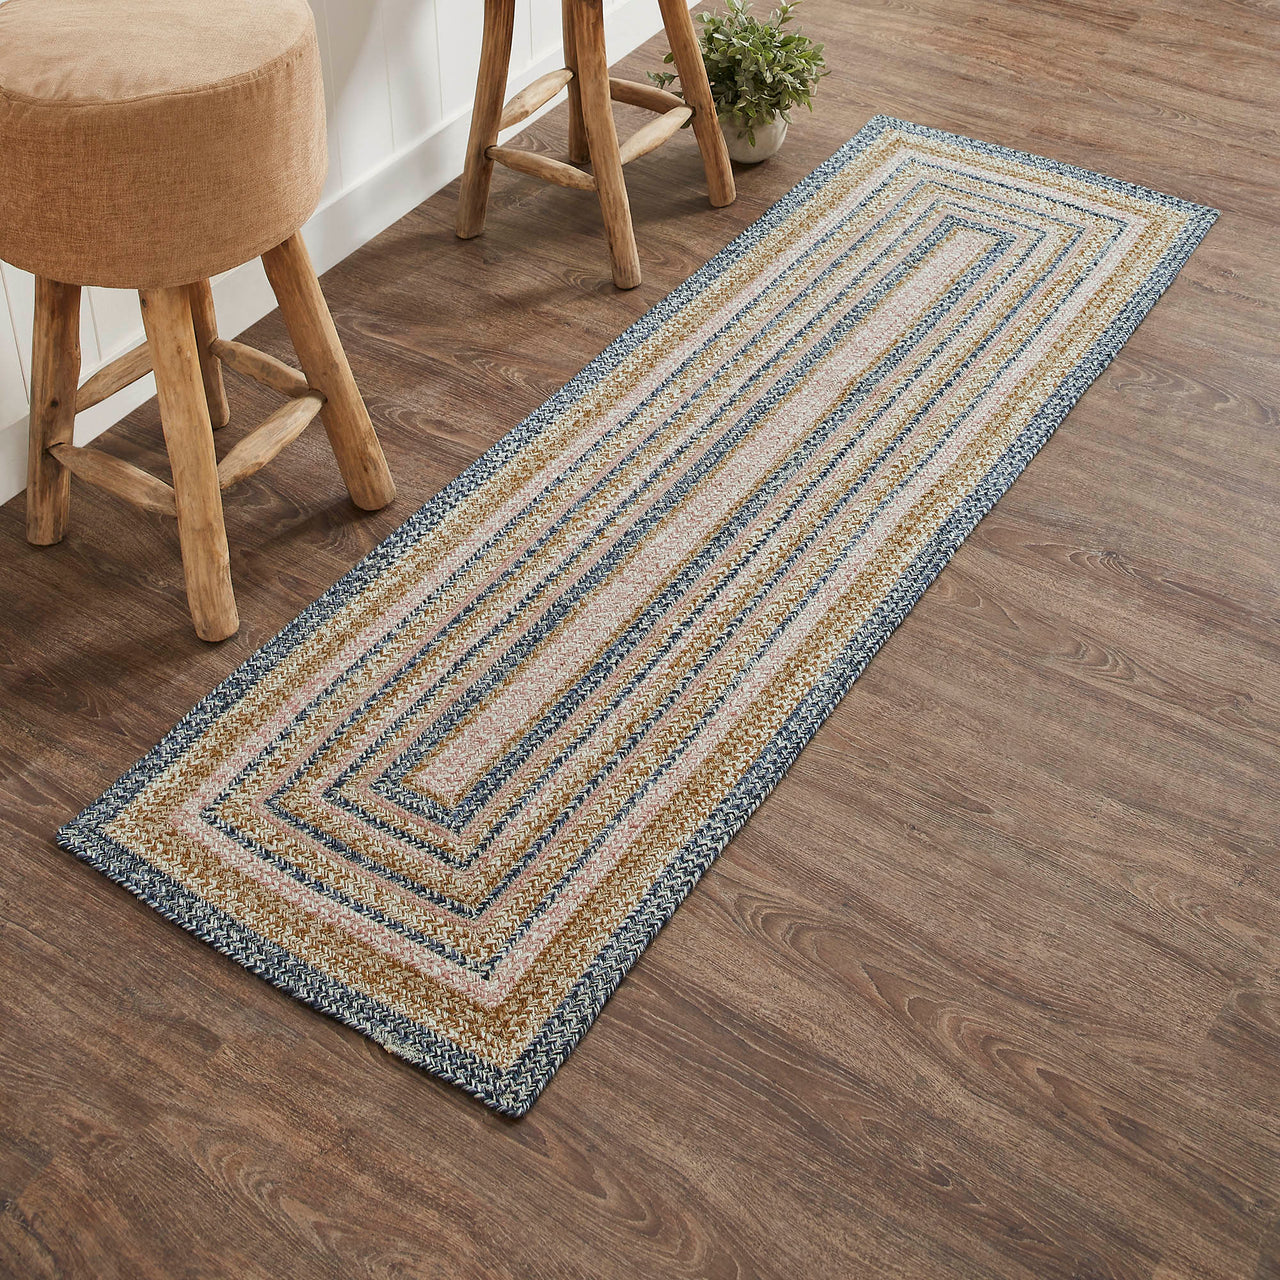 Kaila Jute Braided Runner Rug Rect. with Rug Pad 24"x78" VHC Brands